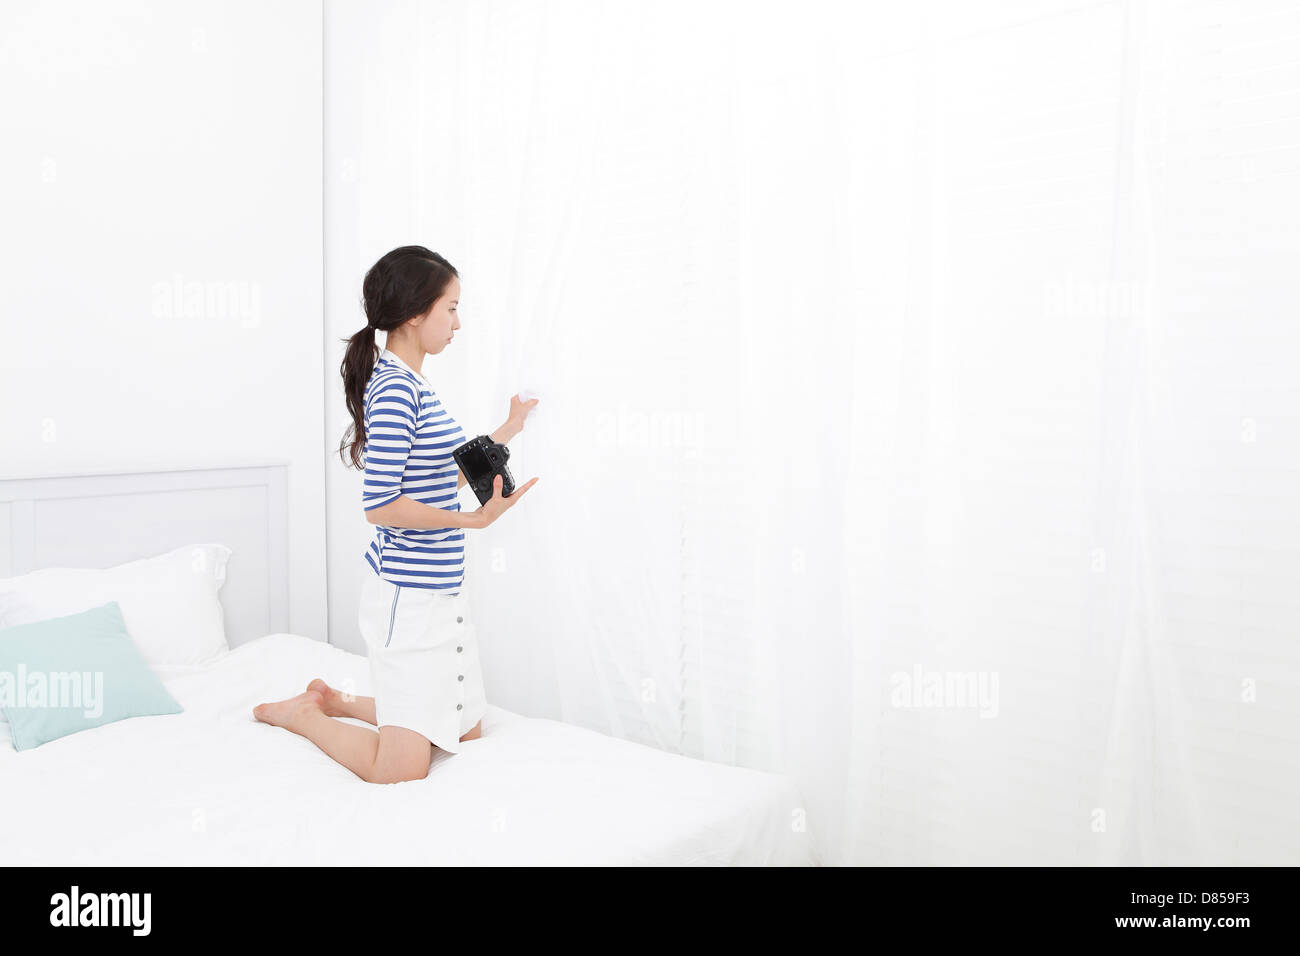 young woman on bed holding camera. Stock Photo